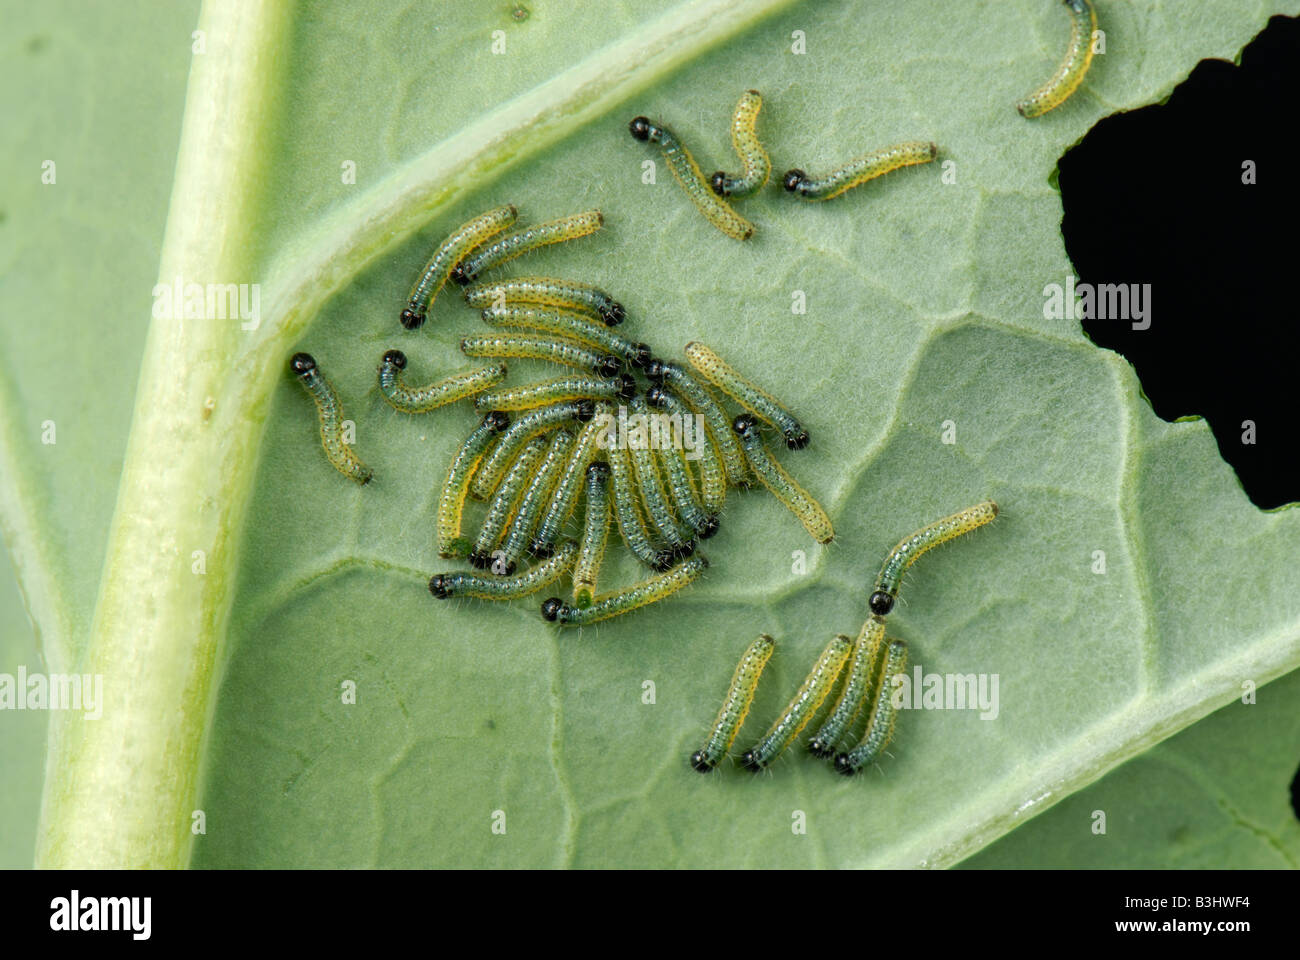 Young caterpillars of a large white butterfly Pieris brassicae on a damaged cabbage leaf Stock Photo